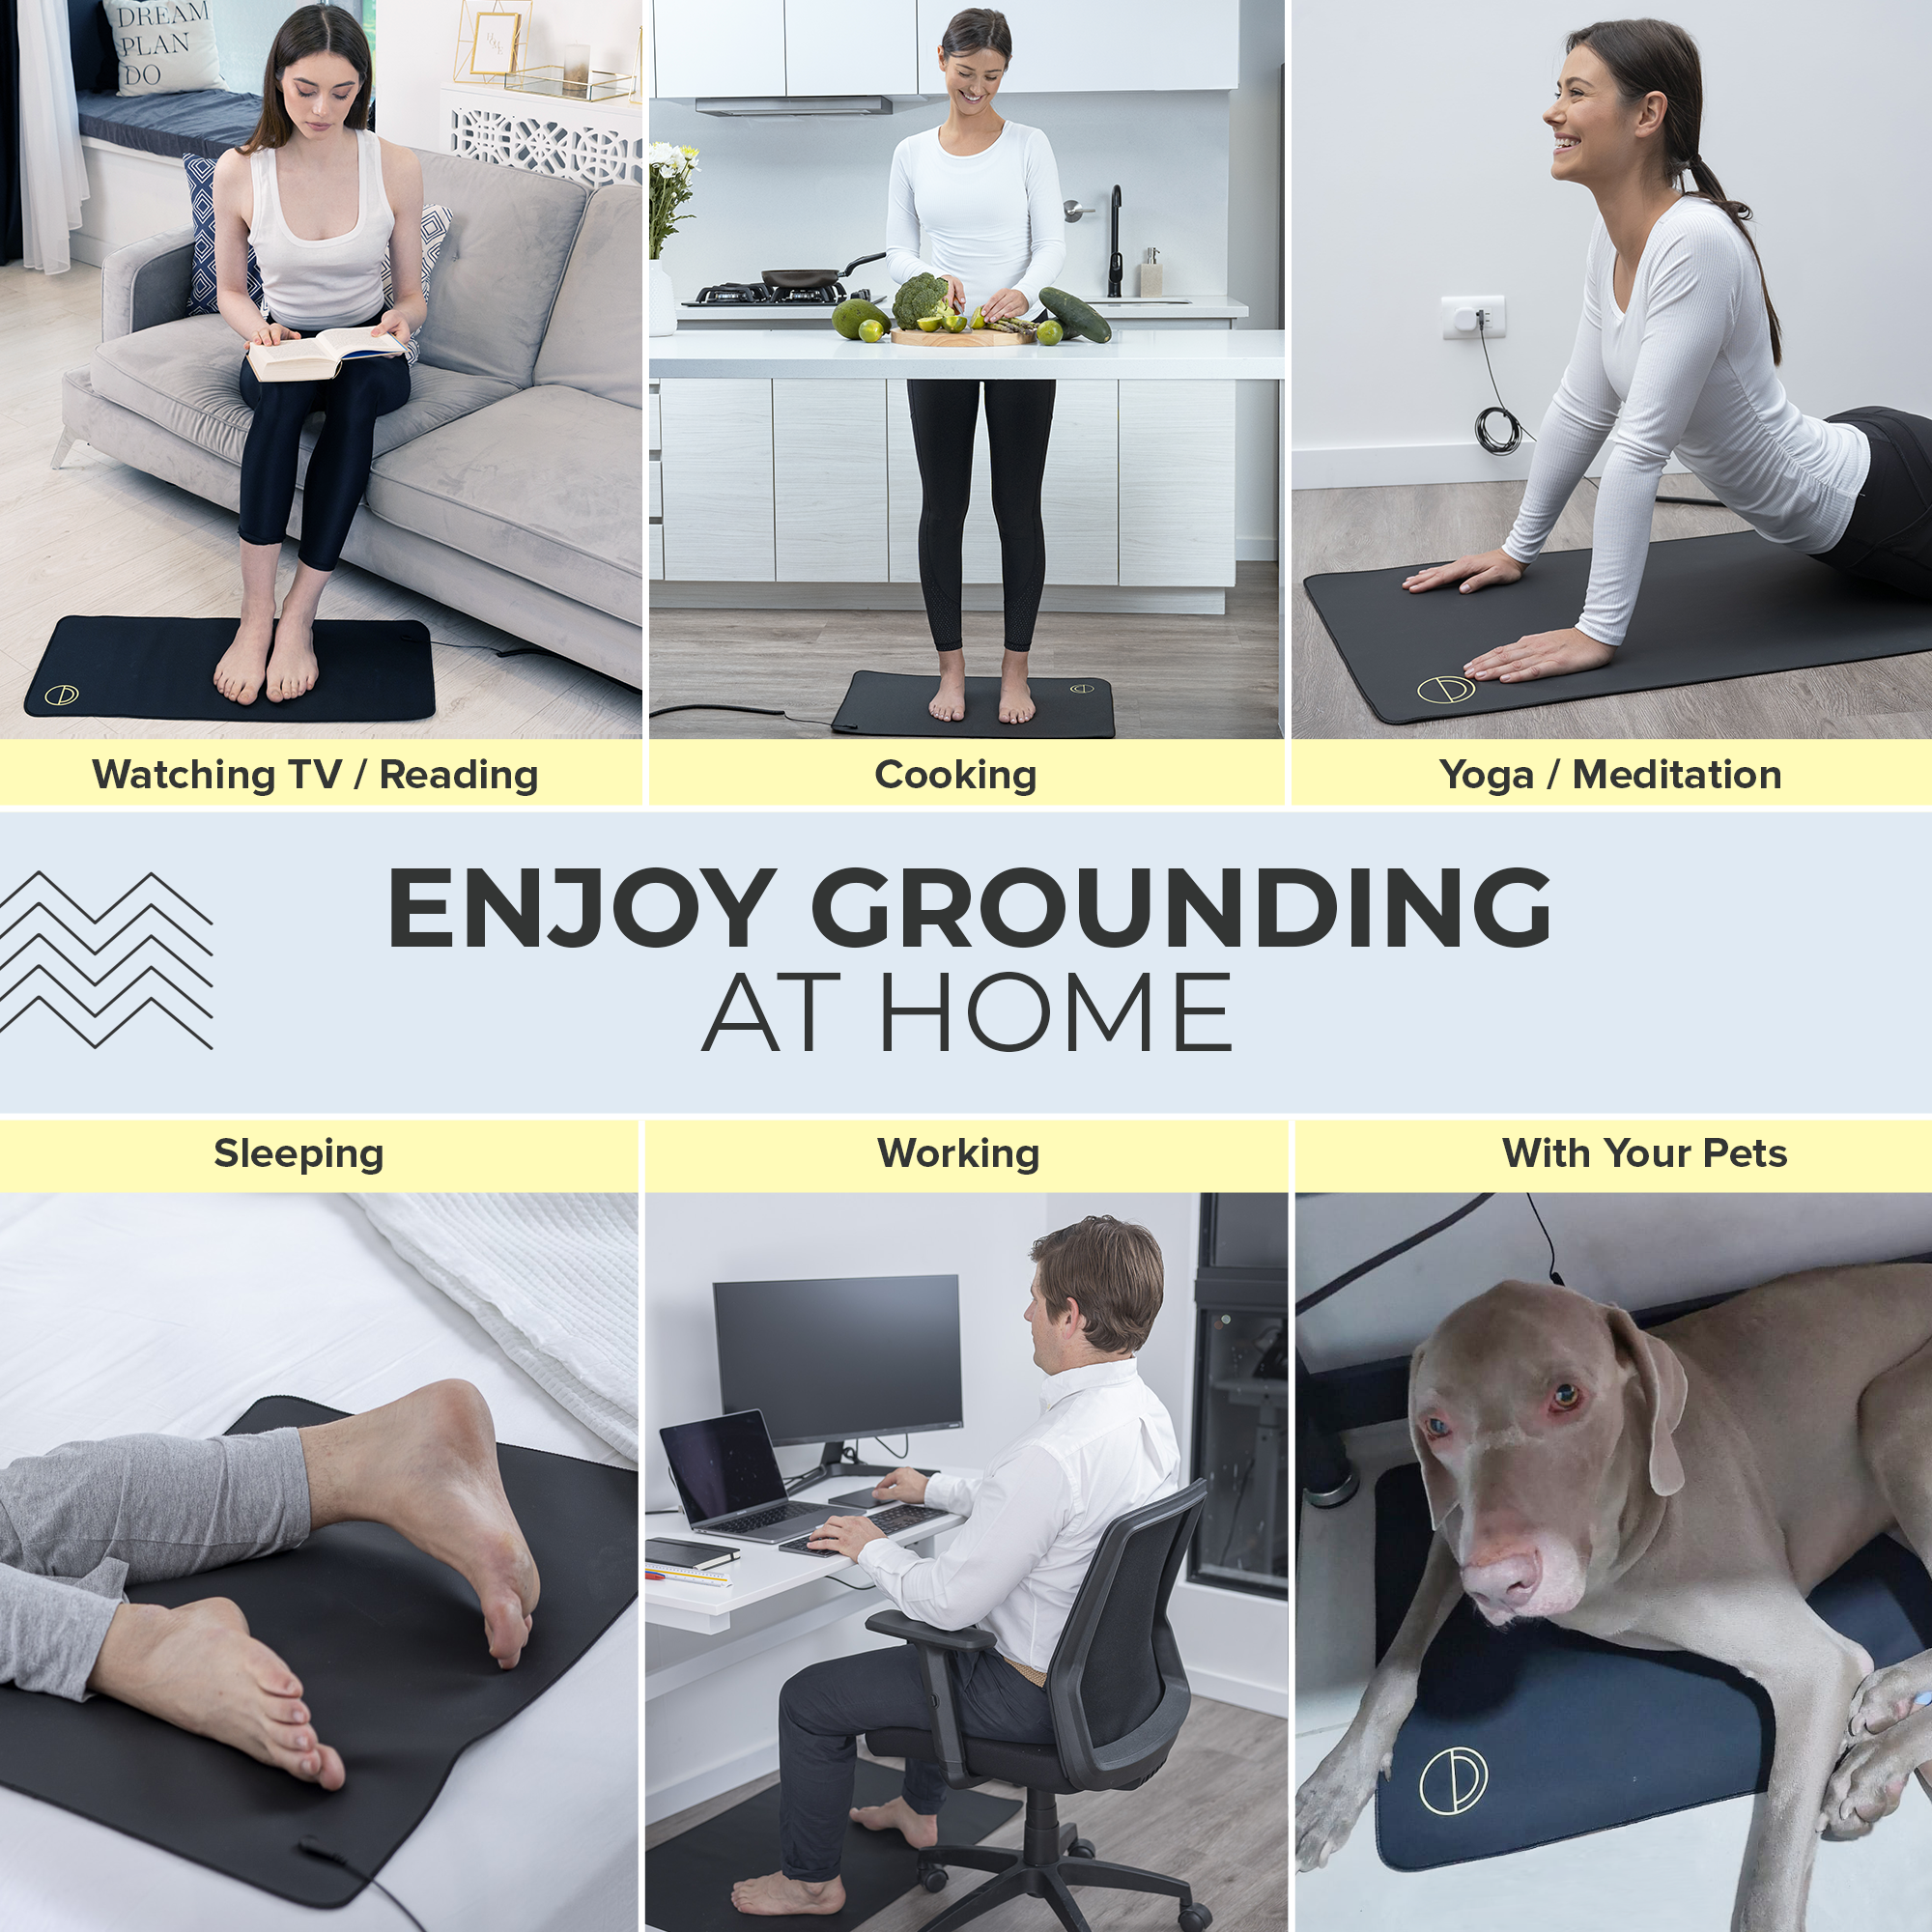 grounding at home is better when your grounding mat is tested with the continuity tester